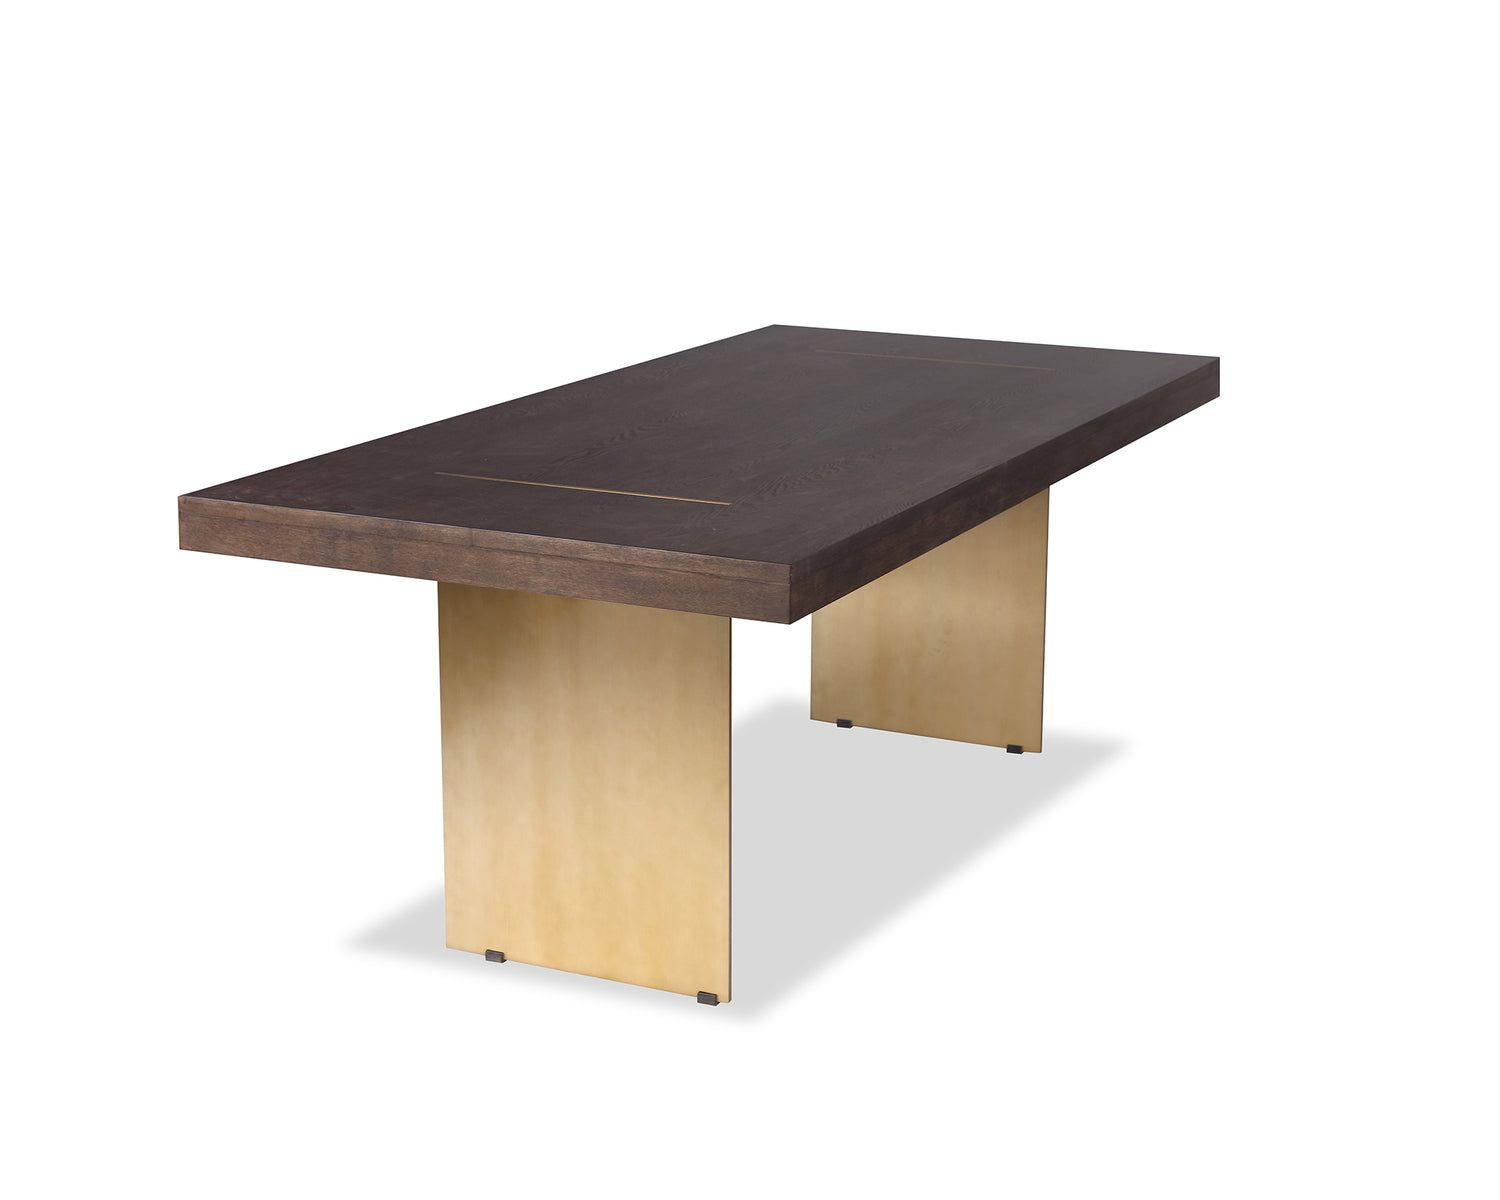  LiangAndEimil-Liang & Eimil Unma Dining Table Dark Brown- 81 